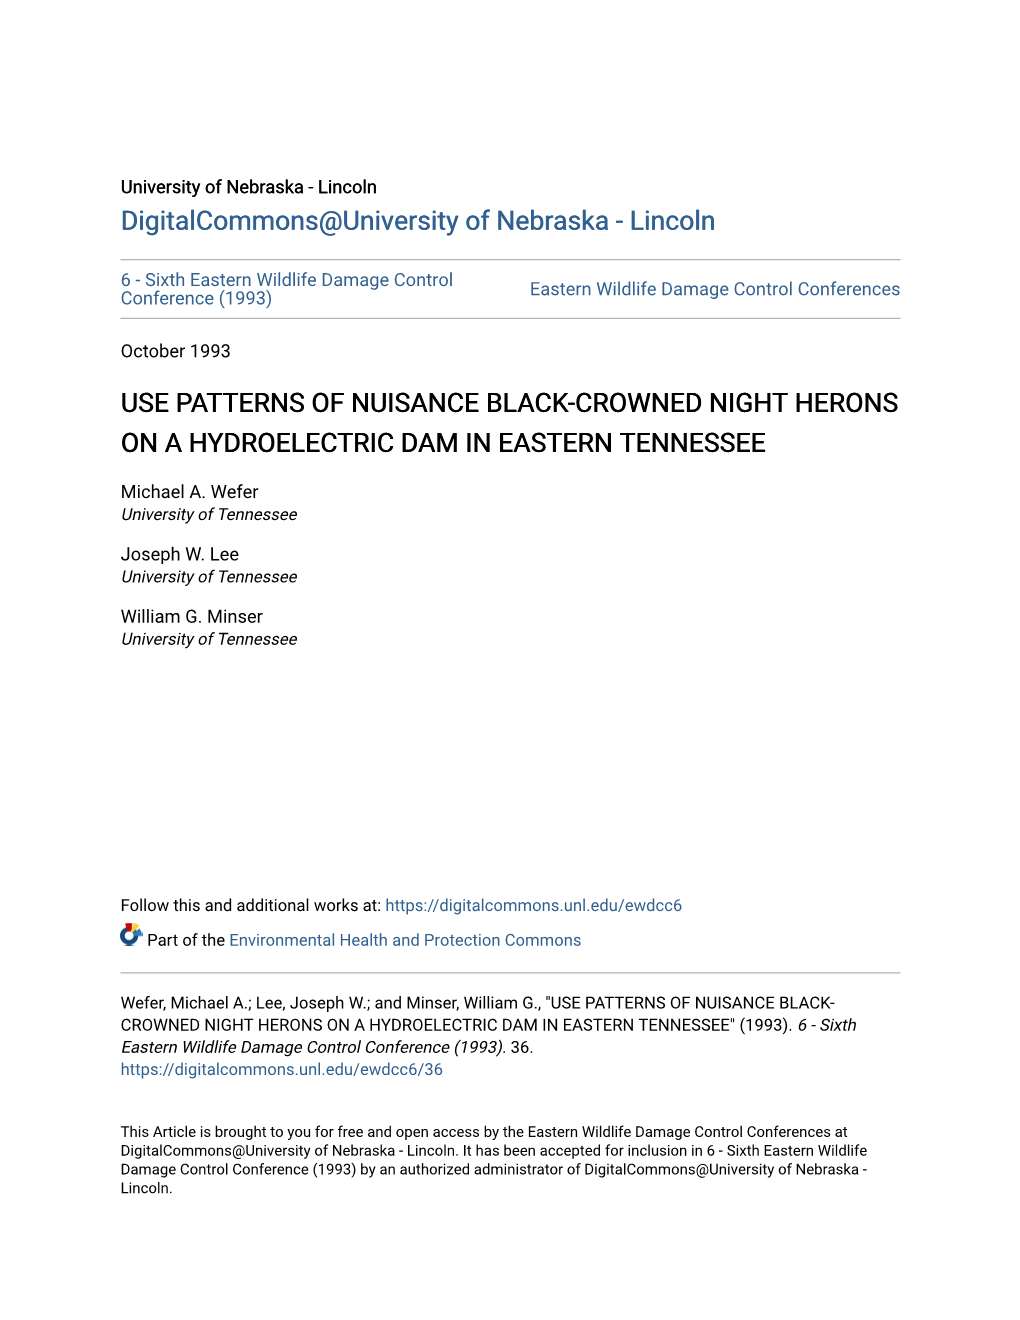 Use Patterns of Nuisance Black-Crowned Night Herons on a Hydroelectric Dam in Eastern Tennessee